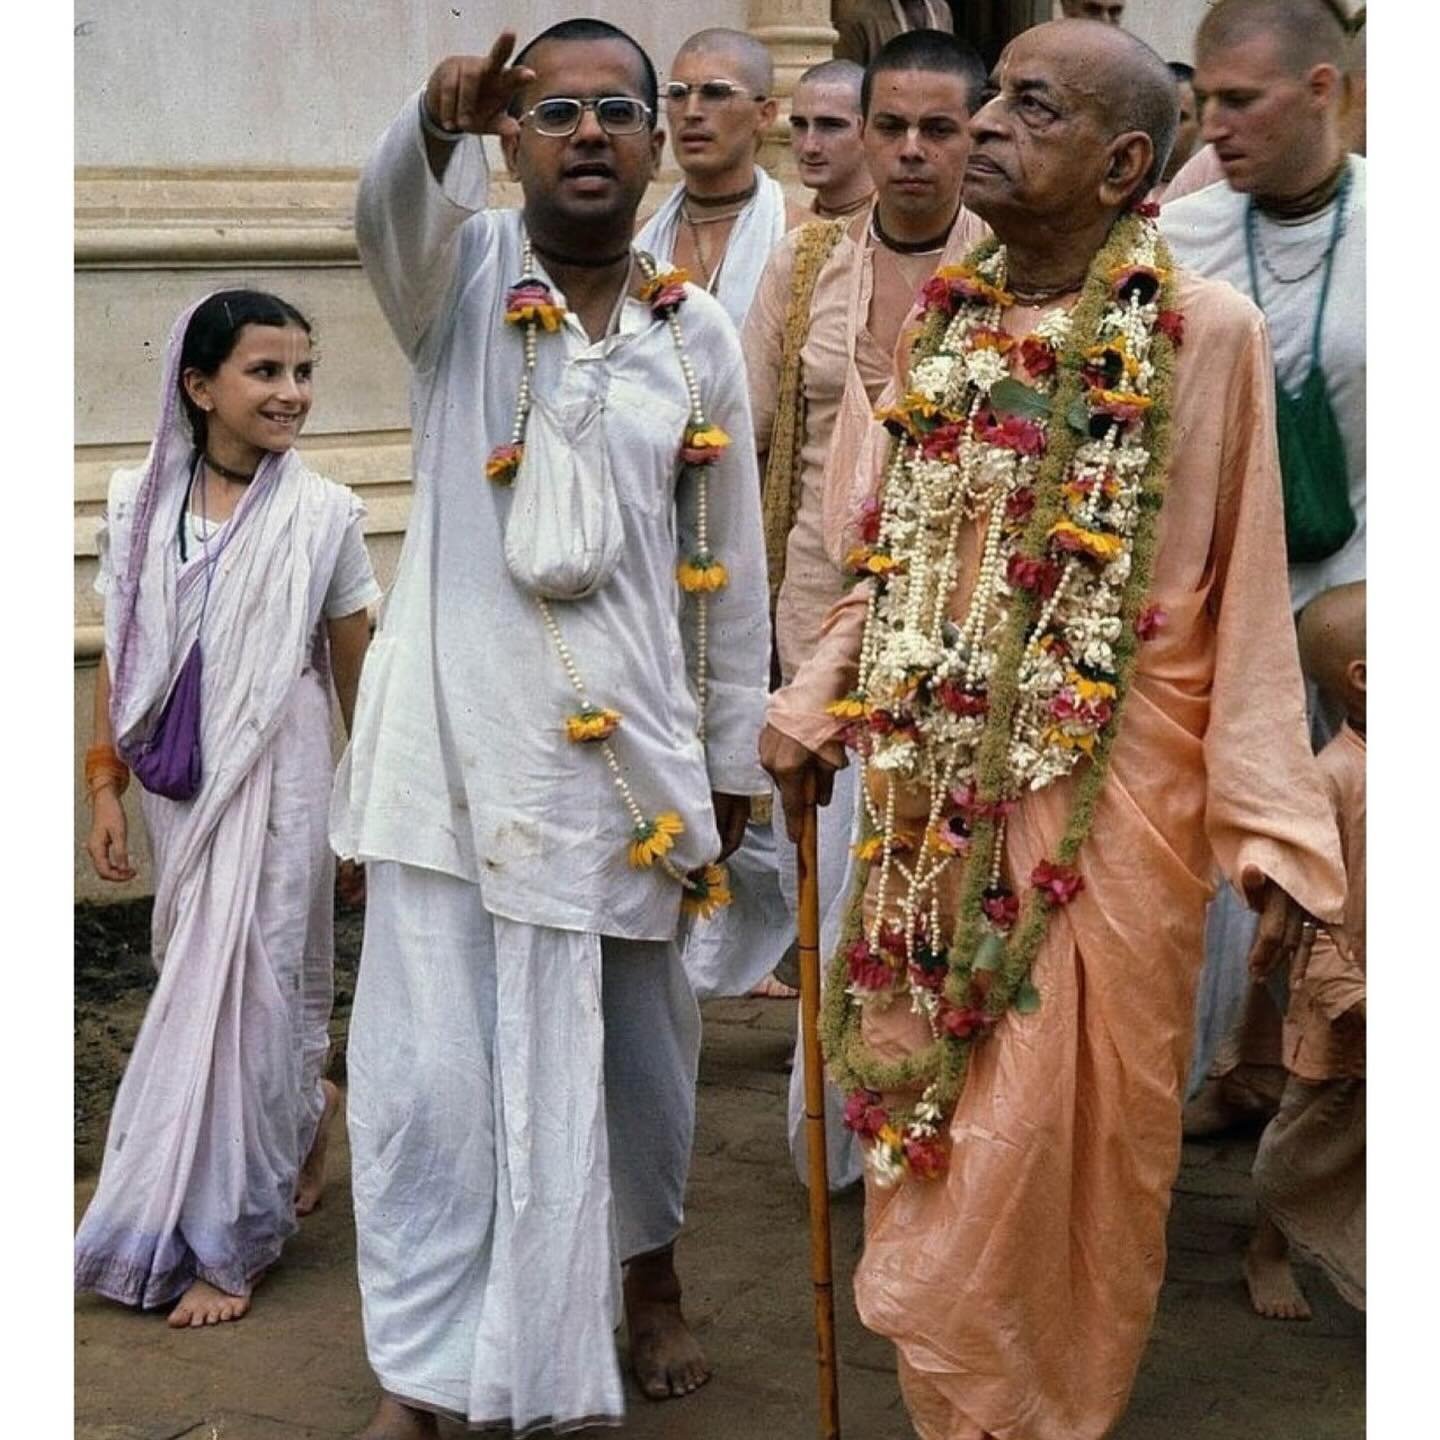 A Tribute to His Holiness Gopal Krishna Maharaj From a Godsister

We are all mourning the loss of a great stalwart leader, one of the the most dedicated and selfless disciples of Srila Prabhupada.
 
I first met Gopal Krishna (before he was Maharaj) i